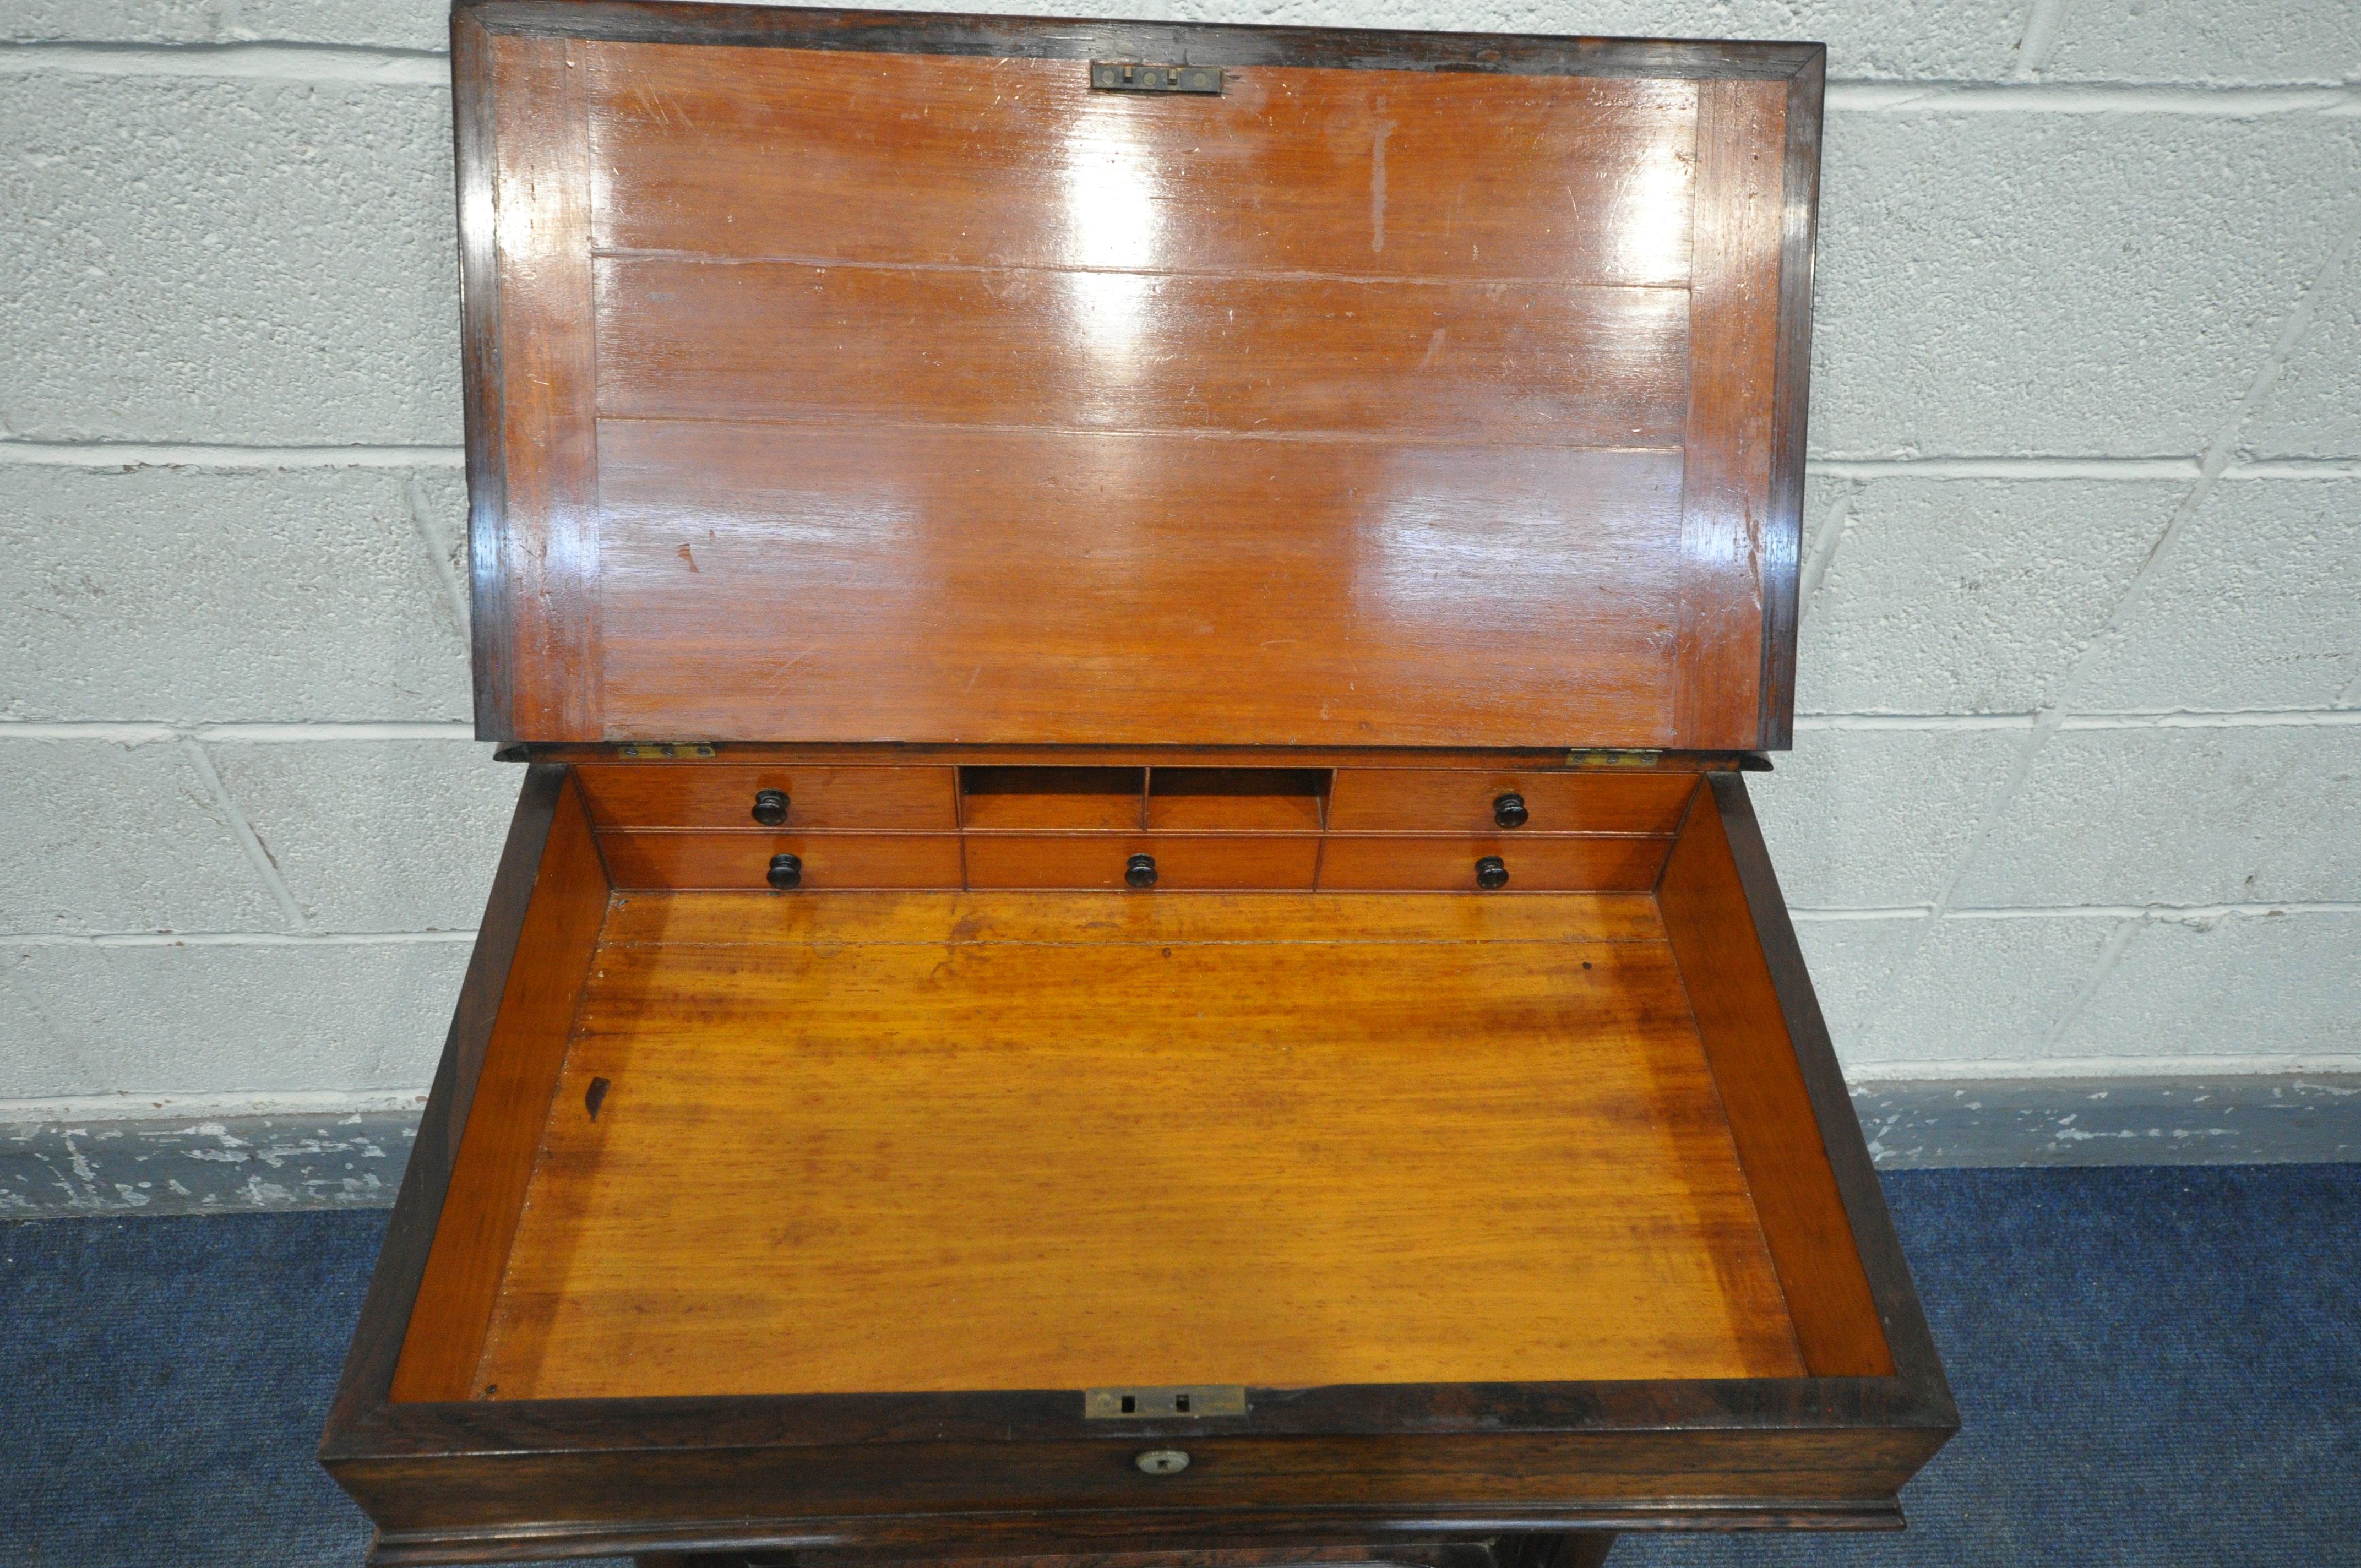 AN EARLY 19TH CENTURY ROSEWOOD DAVENPORT DESK, having a brass open fretwork gallery behind a leather - Image 5 of 9